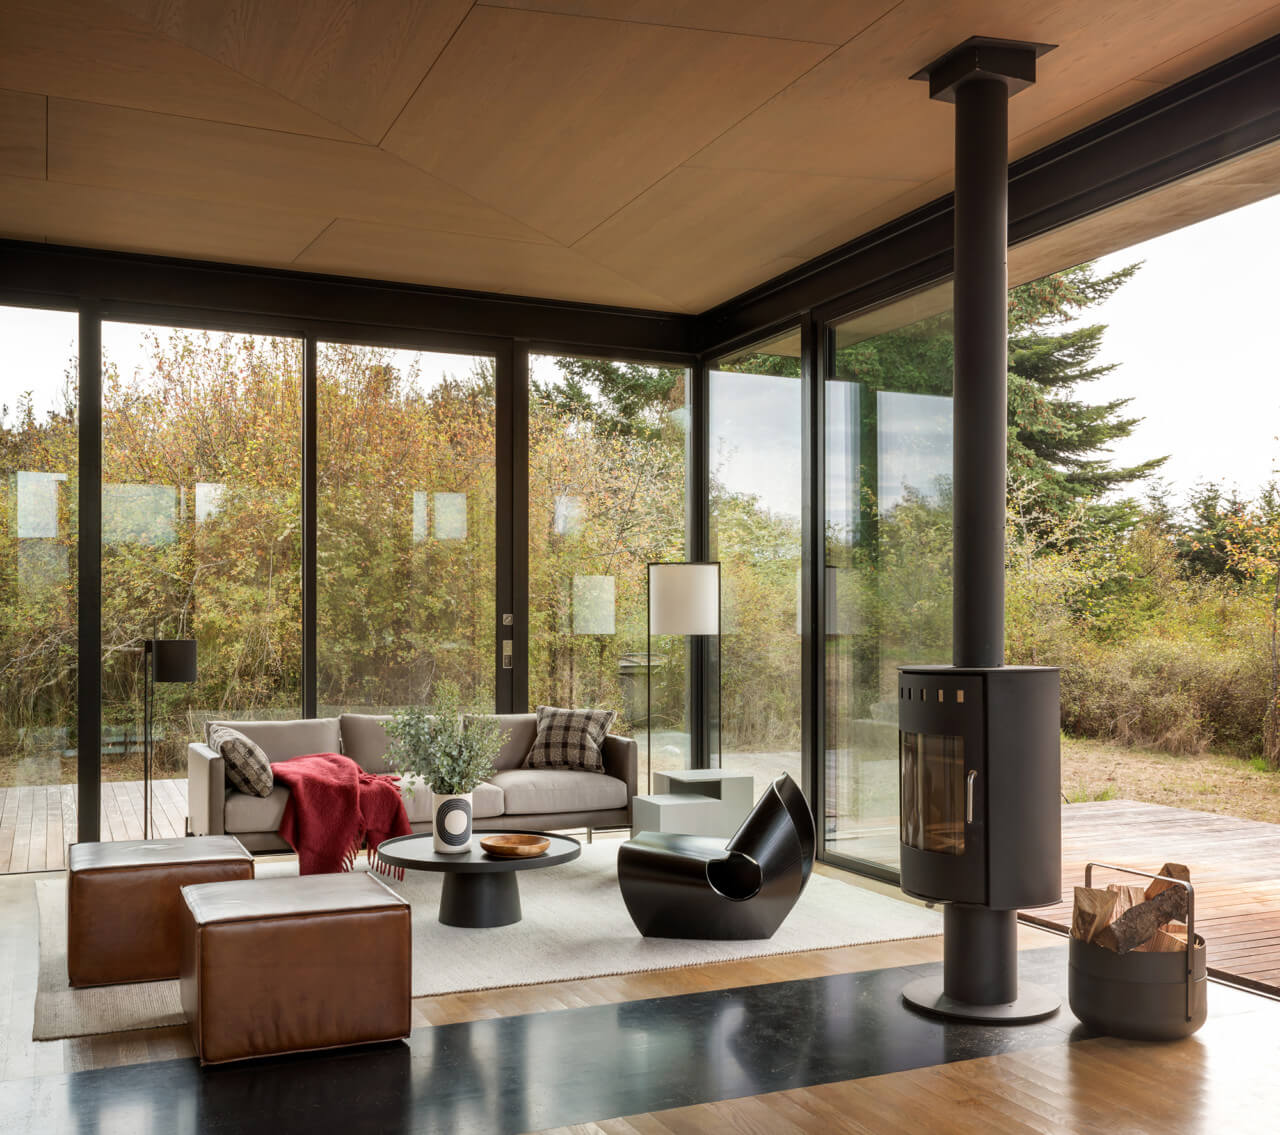 Inside of a modern cabin with a fireplace